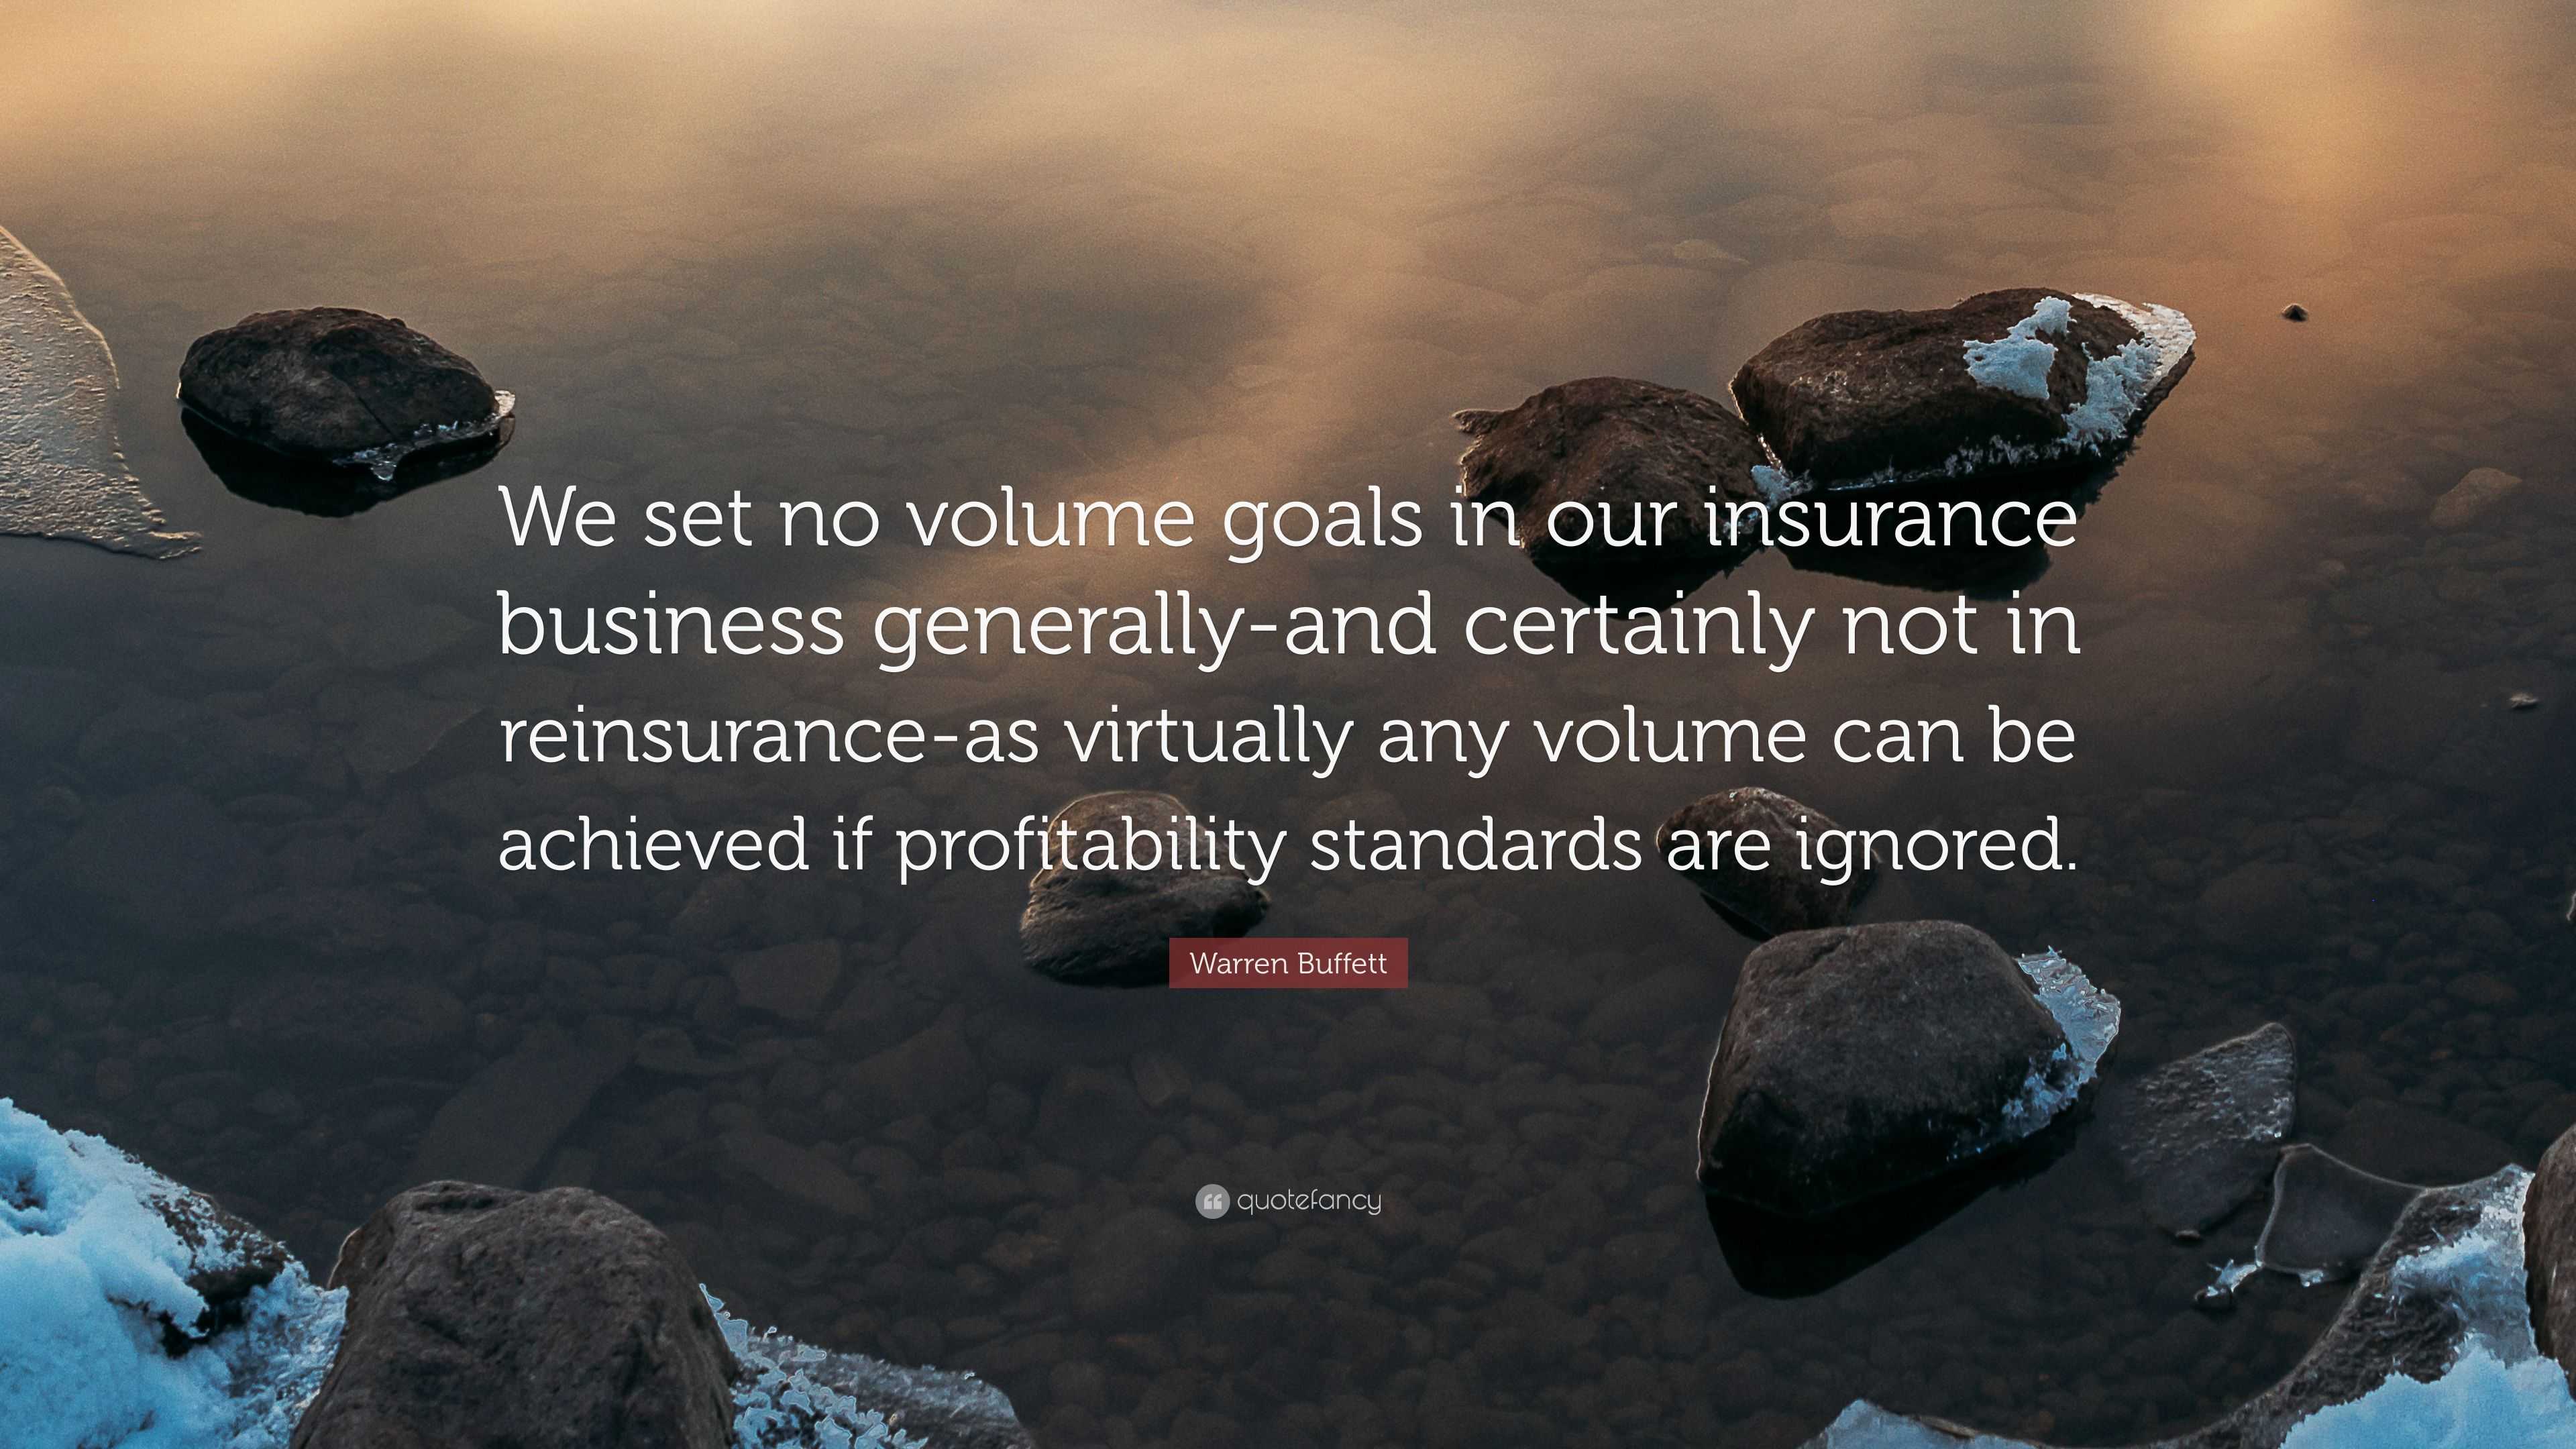 Warren Buffett Quote: “We Set No Volume Goals In Our Insurance Business Generally-And Certainly Not In Reinsurance-As Virtually Any Volume Can ...”